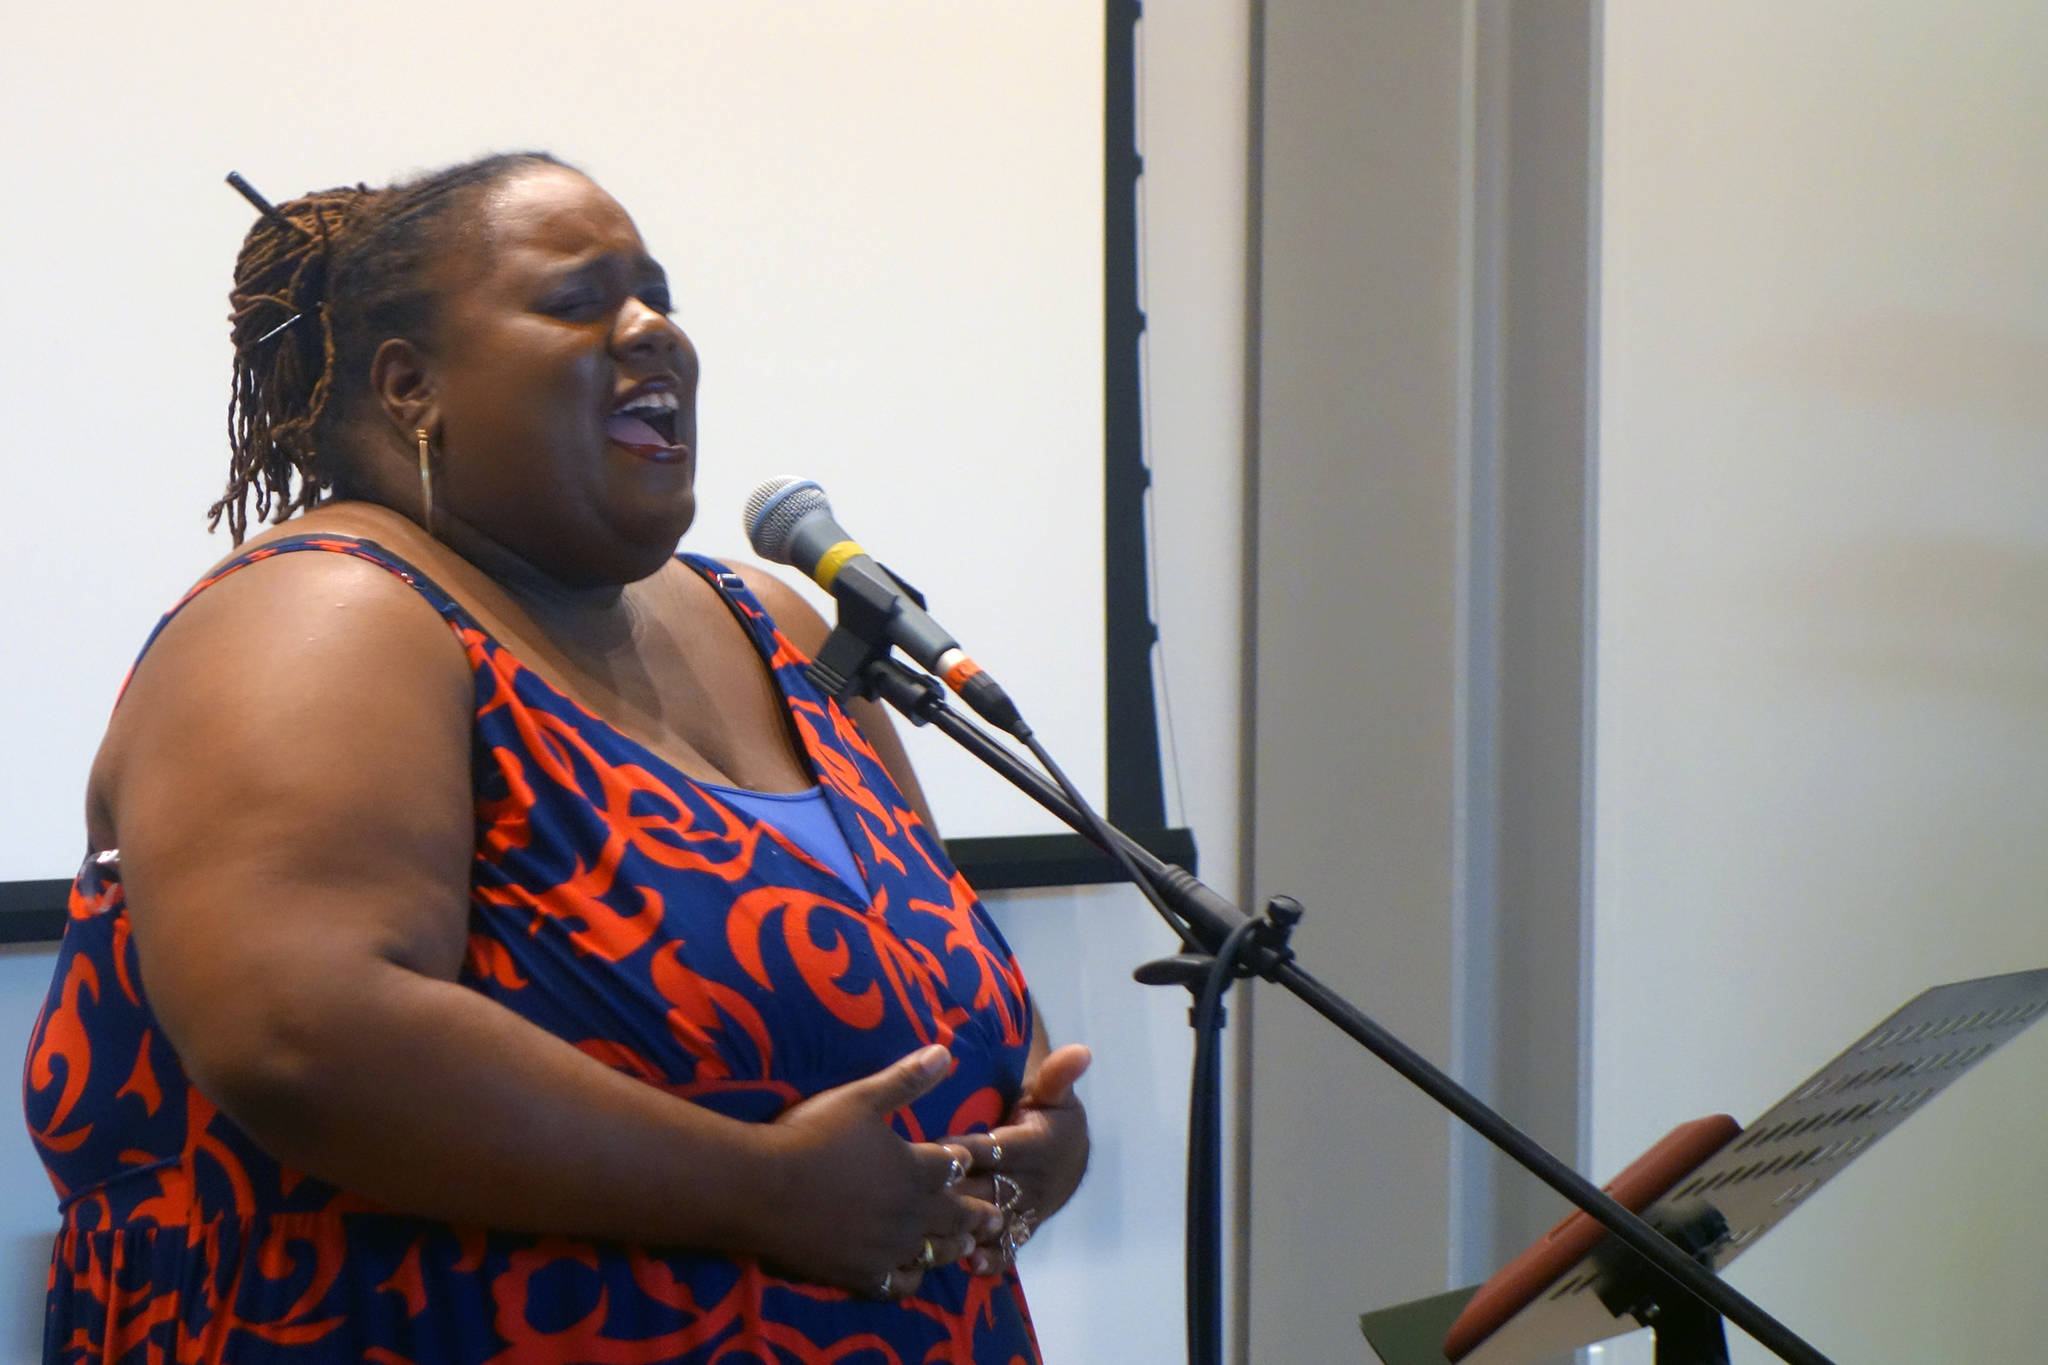 Jocelyn Miles sings during P.O.C. Palooza at the Mendenhall Valley library, Friday, Aug. 16, 2019. (Capital City Weekly | Ben Hohenstatt)